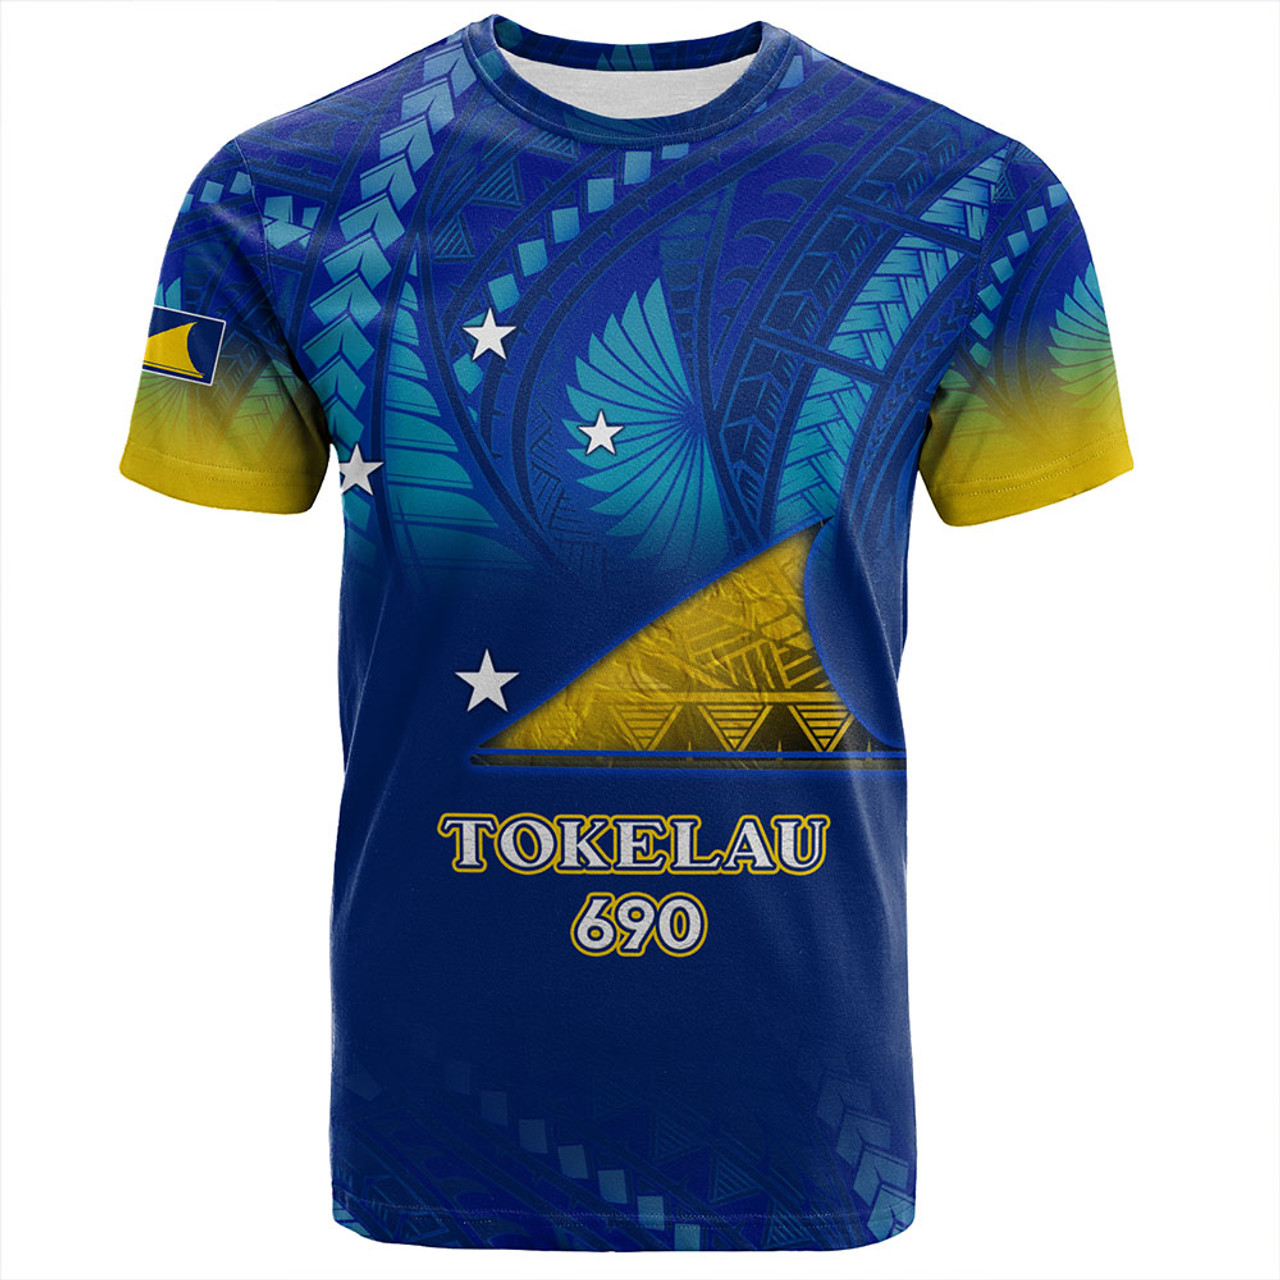 Tokelau T-Shirt Flag Color With Traditional Patterns